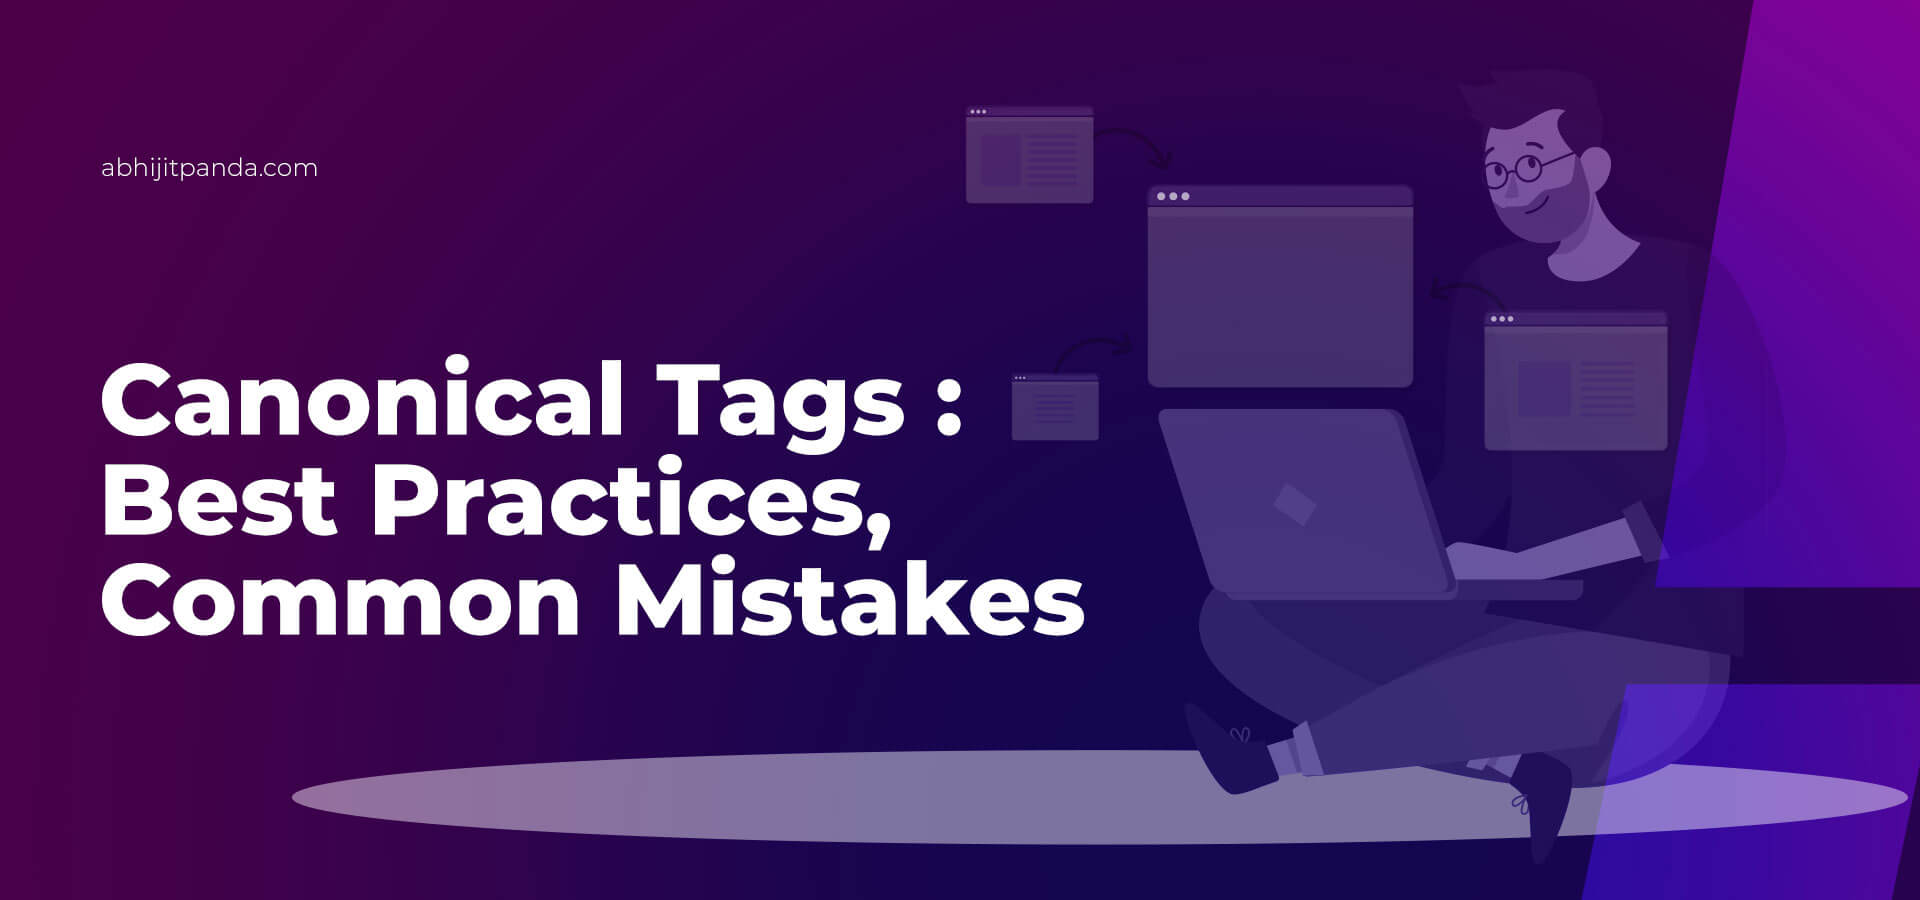 How to Add Canonical Tags